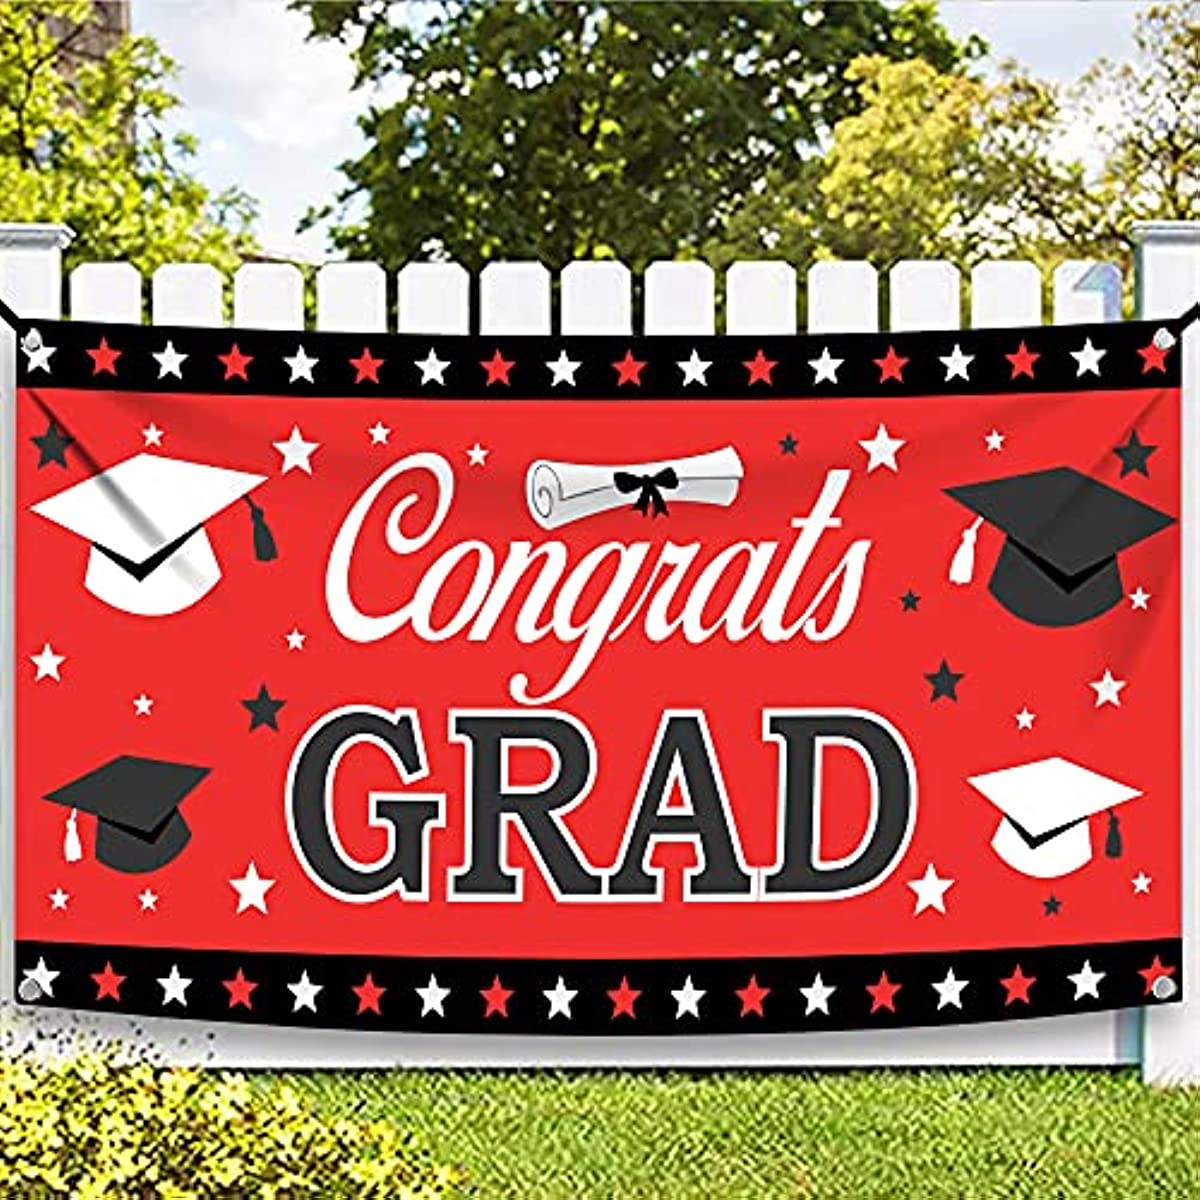 Class of 2023 Graduation Backdrop Congrats Party Gold Photo Background  Banner